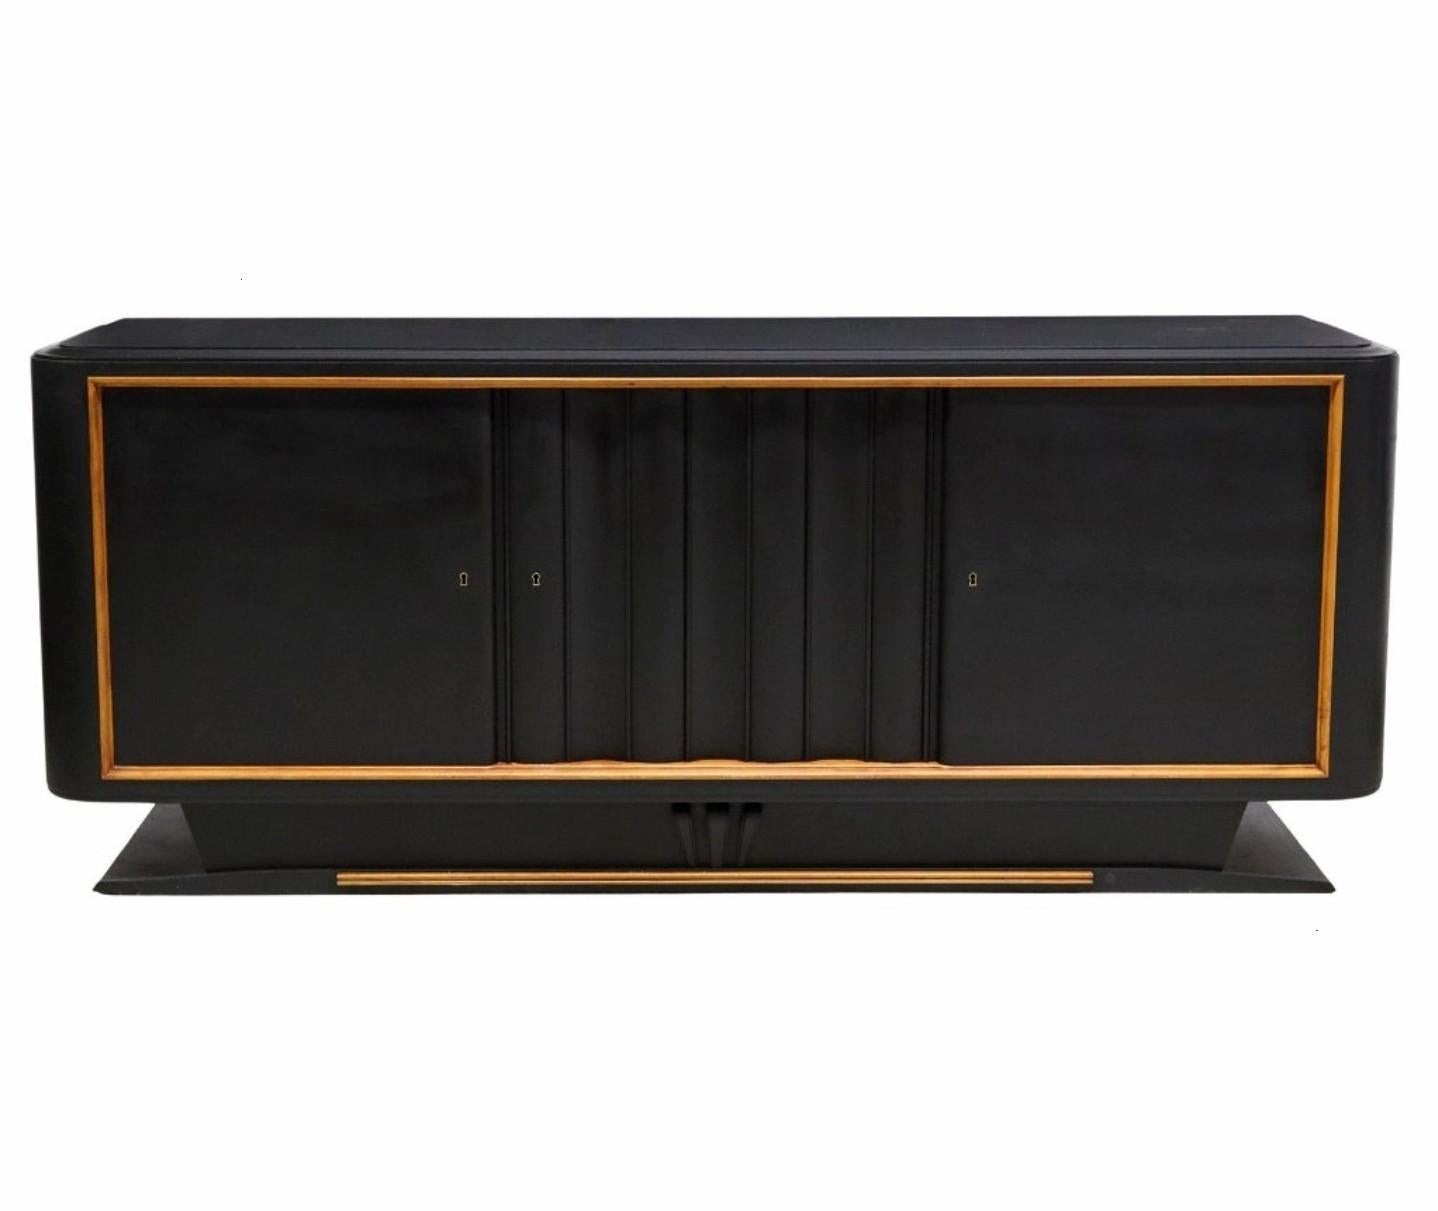 French Art Deco Moderne Painted Black Credenza Sideboard  6